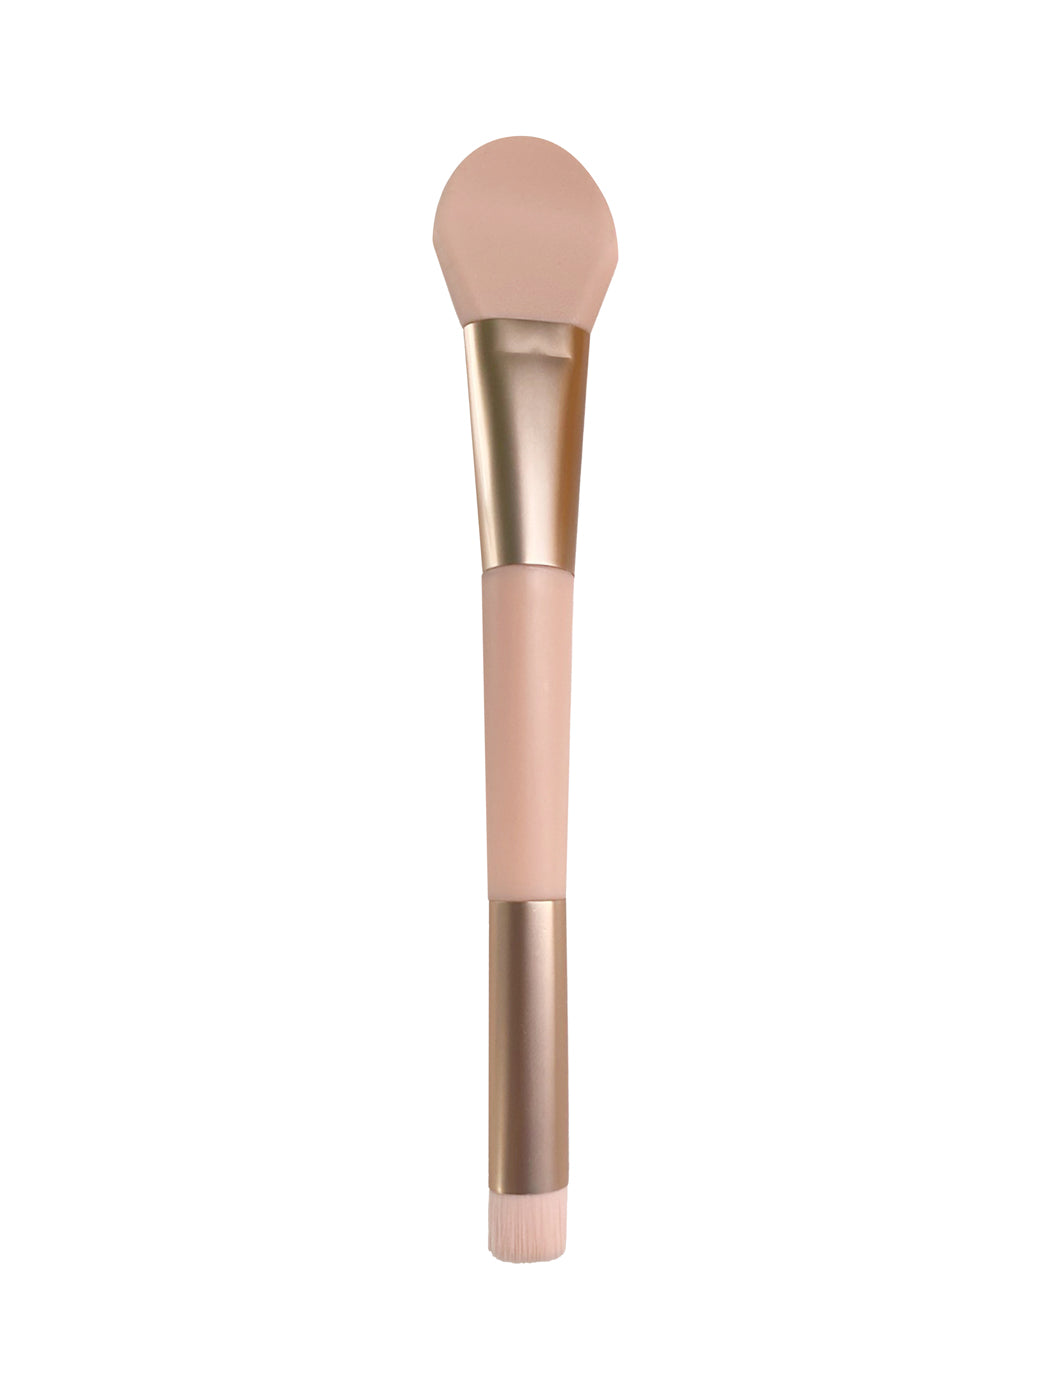 MINISO PUDDING SERIES SILICONE DOUBLE HEAD MASK BRUSH 2010434010108 MAKEUP BRUSH